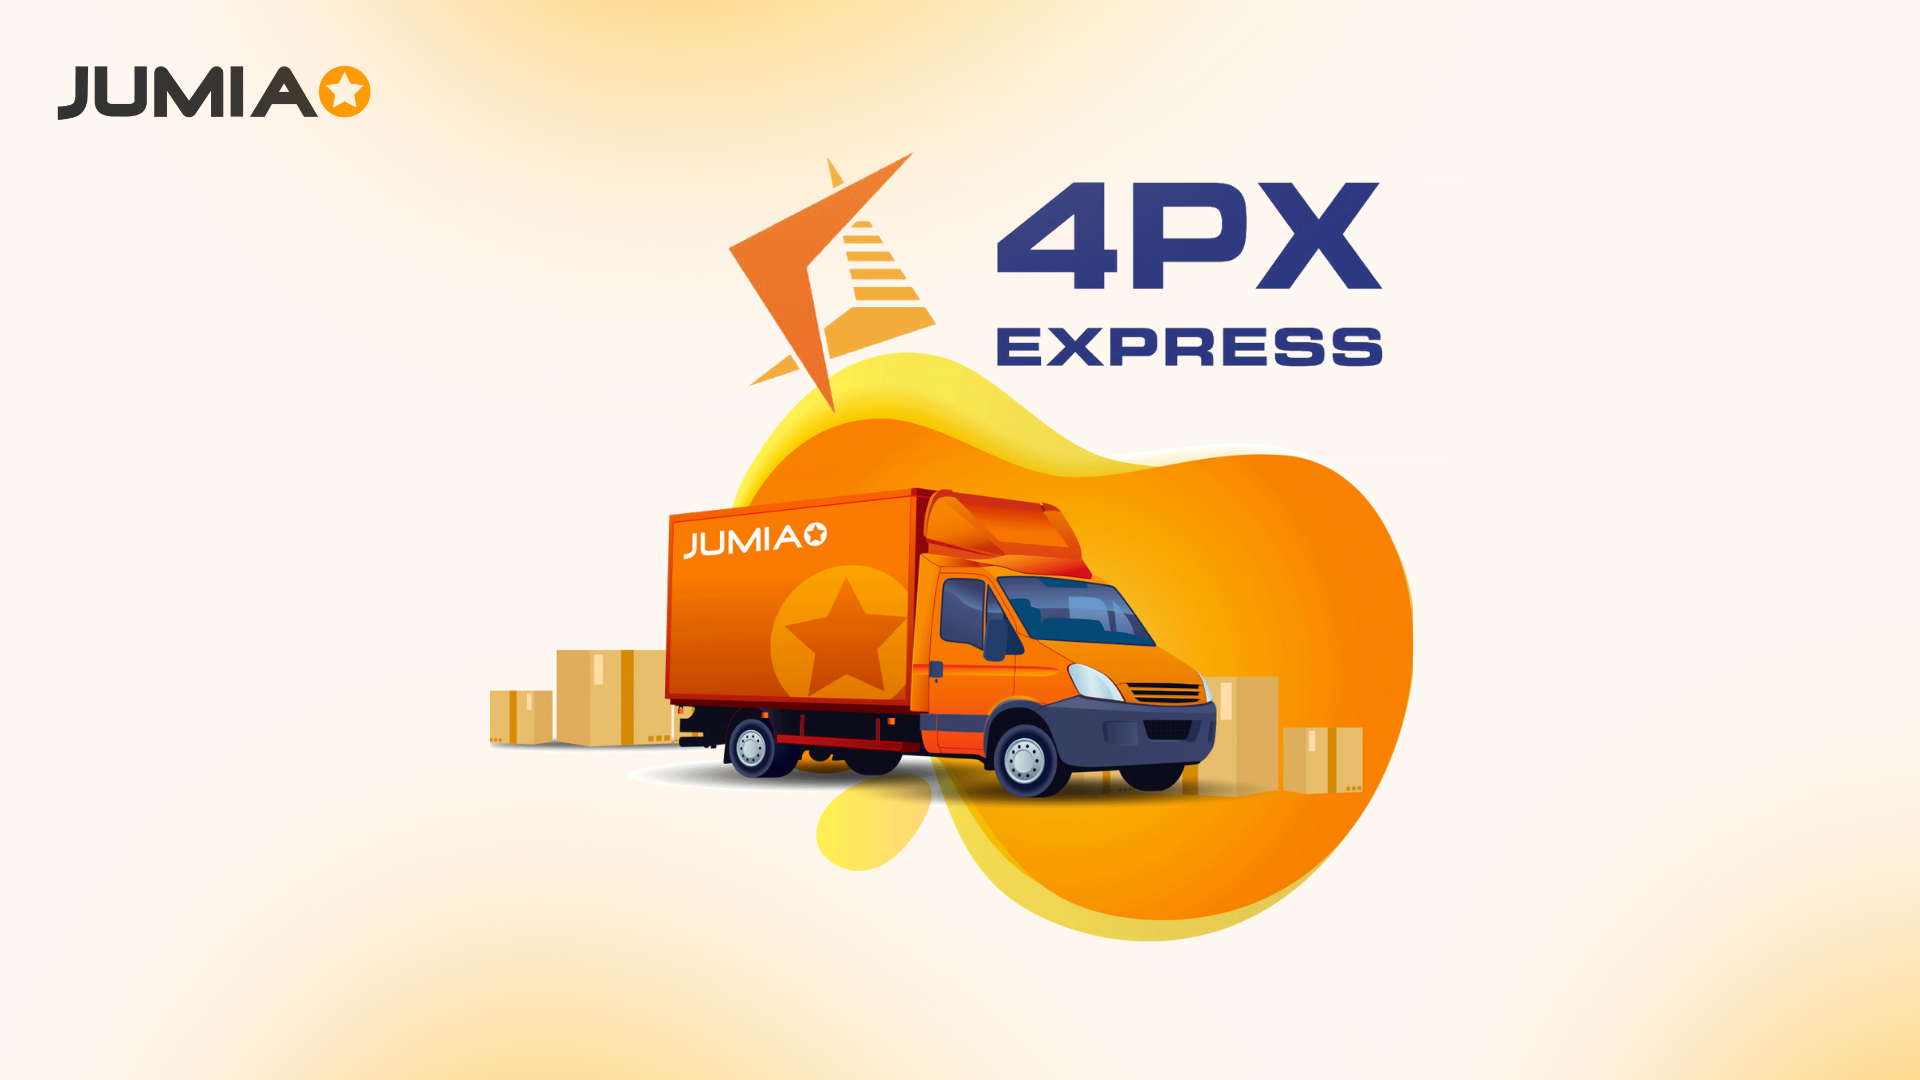  Jumia, the leading e-commerce platform in Africa, will support China’s leading cross-border logistic company 4PX to reach more businesses on the continent